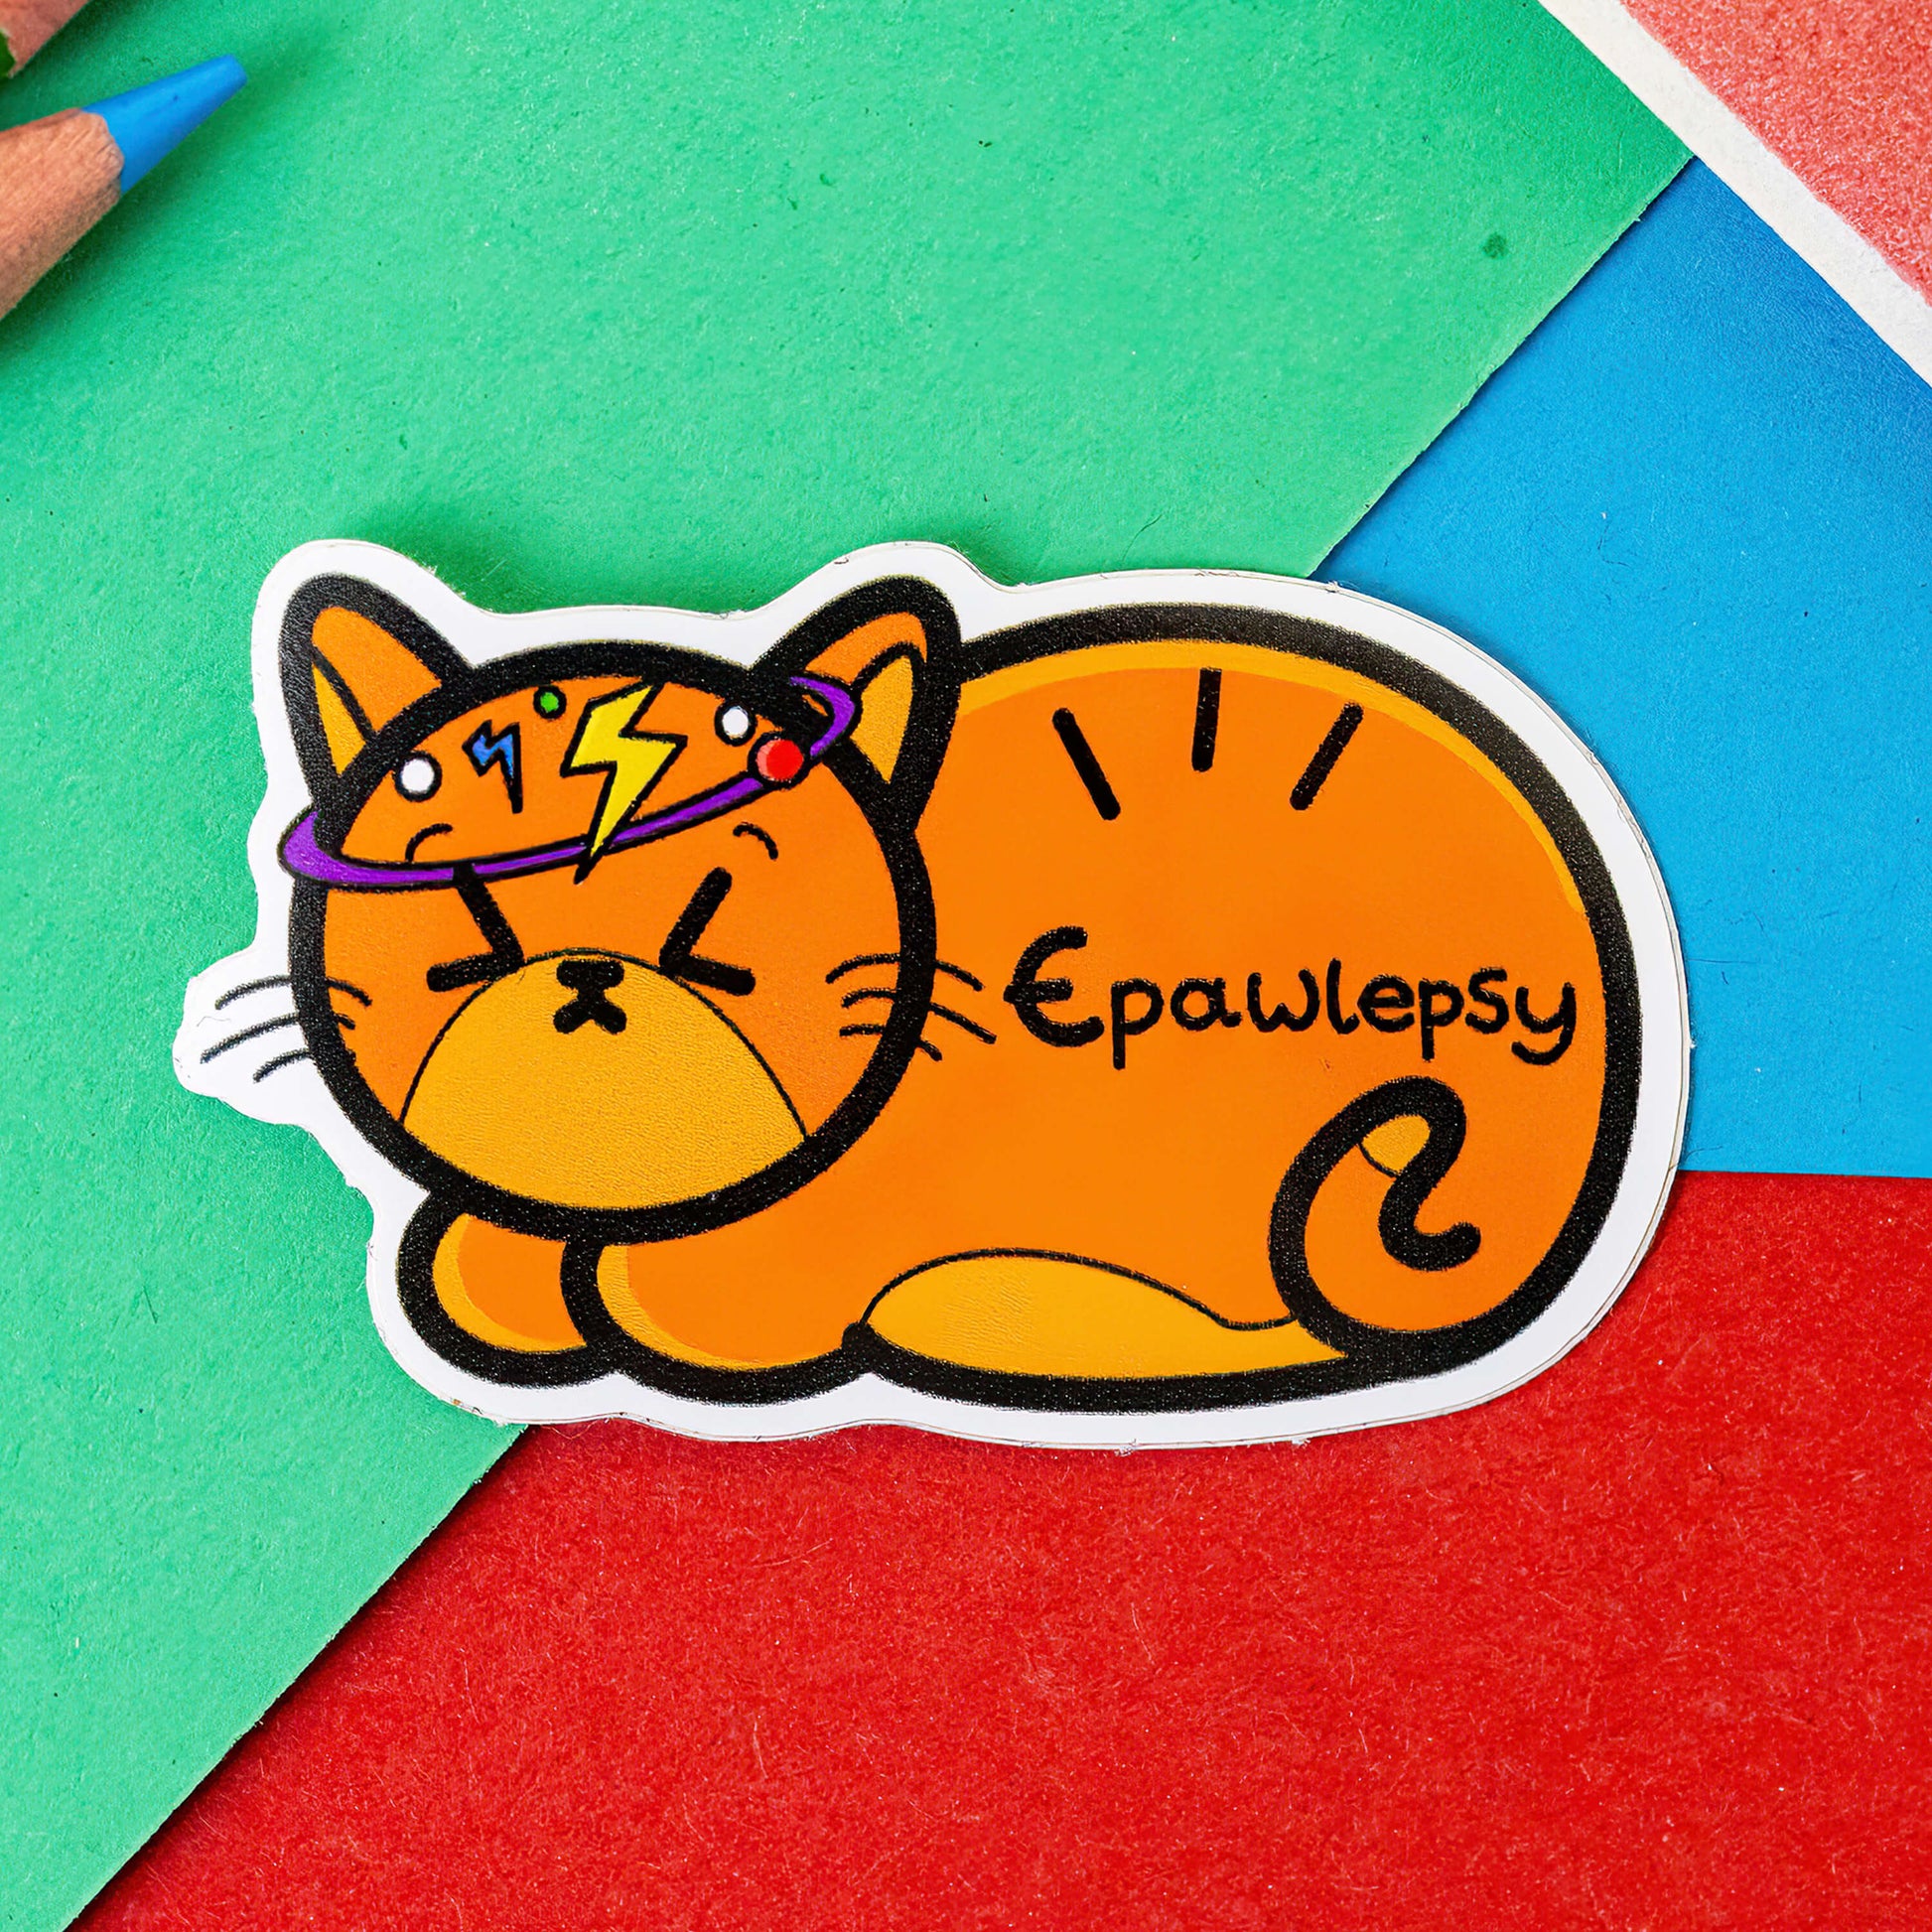 The Epawlepsy - Epilepsy Sticker on a red, green and blue background with colouring pencils. A ginger cat sticker with a dizzy spell drawn around its head it has the word 'Epawlepsy' written on it in black. The hand drawn design is raising awareness for epilepsy and seizures.